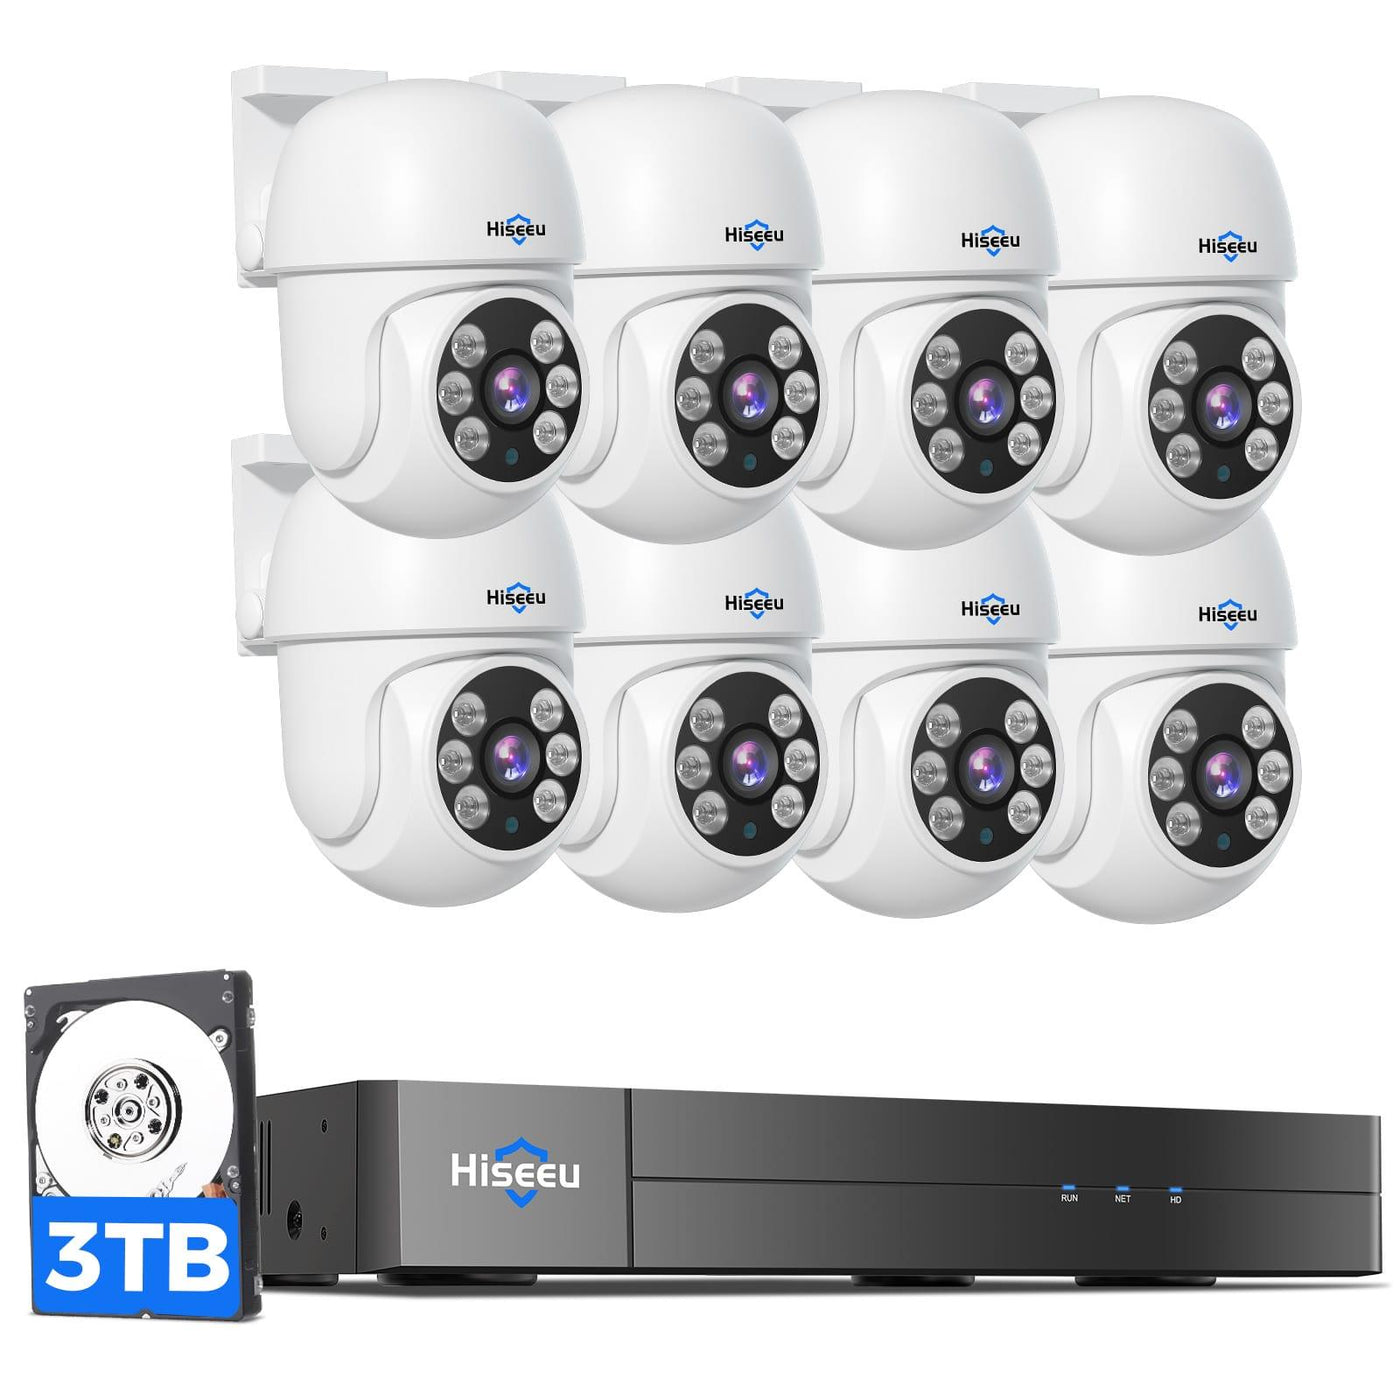 Hiseeu 3K PTZ Wired Security Camera System with Audio 8ch 5MP H.265+ DVR 8PCS TVI Cameras 3TB HDD Person/Vehicle Detection Home CCTV 355°Pan,90°Tilt System,Remote Access,Night Vision,24/7 Record - Hiseeu